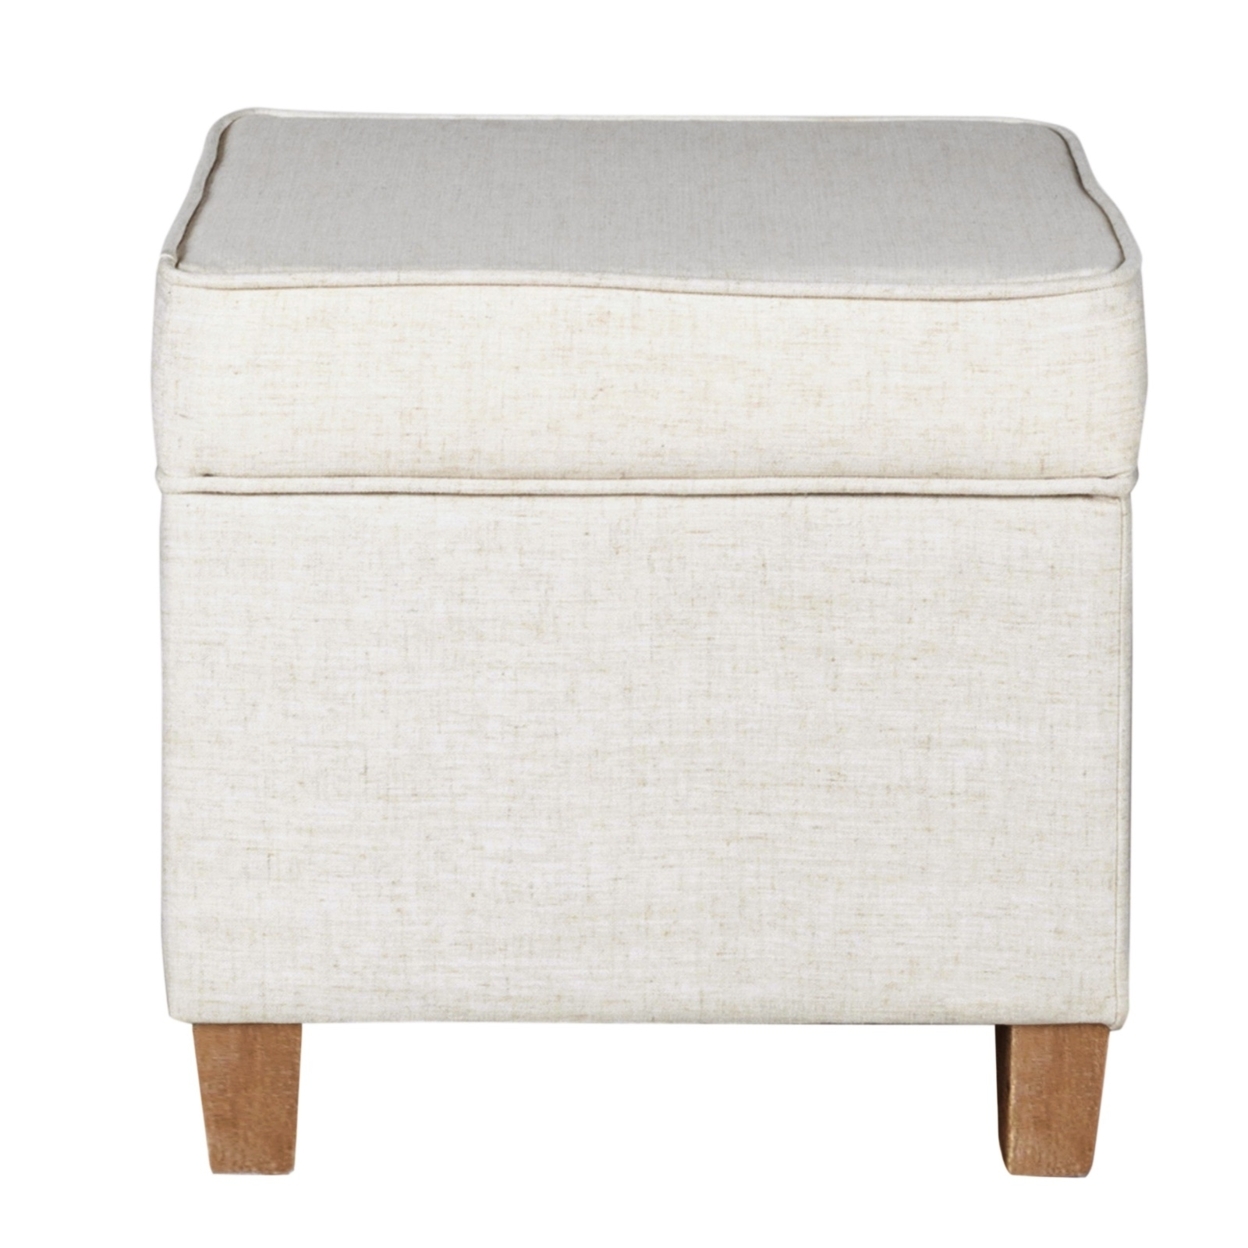 Square Shape Fabric Upholstered Ottoman With Lift Off Top And Wooden Tapered Feet, White And Brown- Saltoro Sherpi